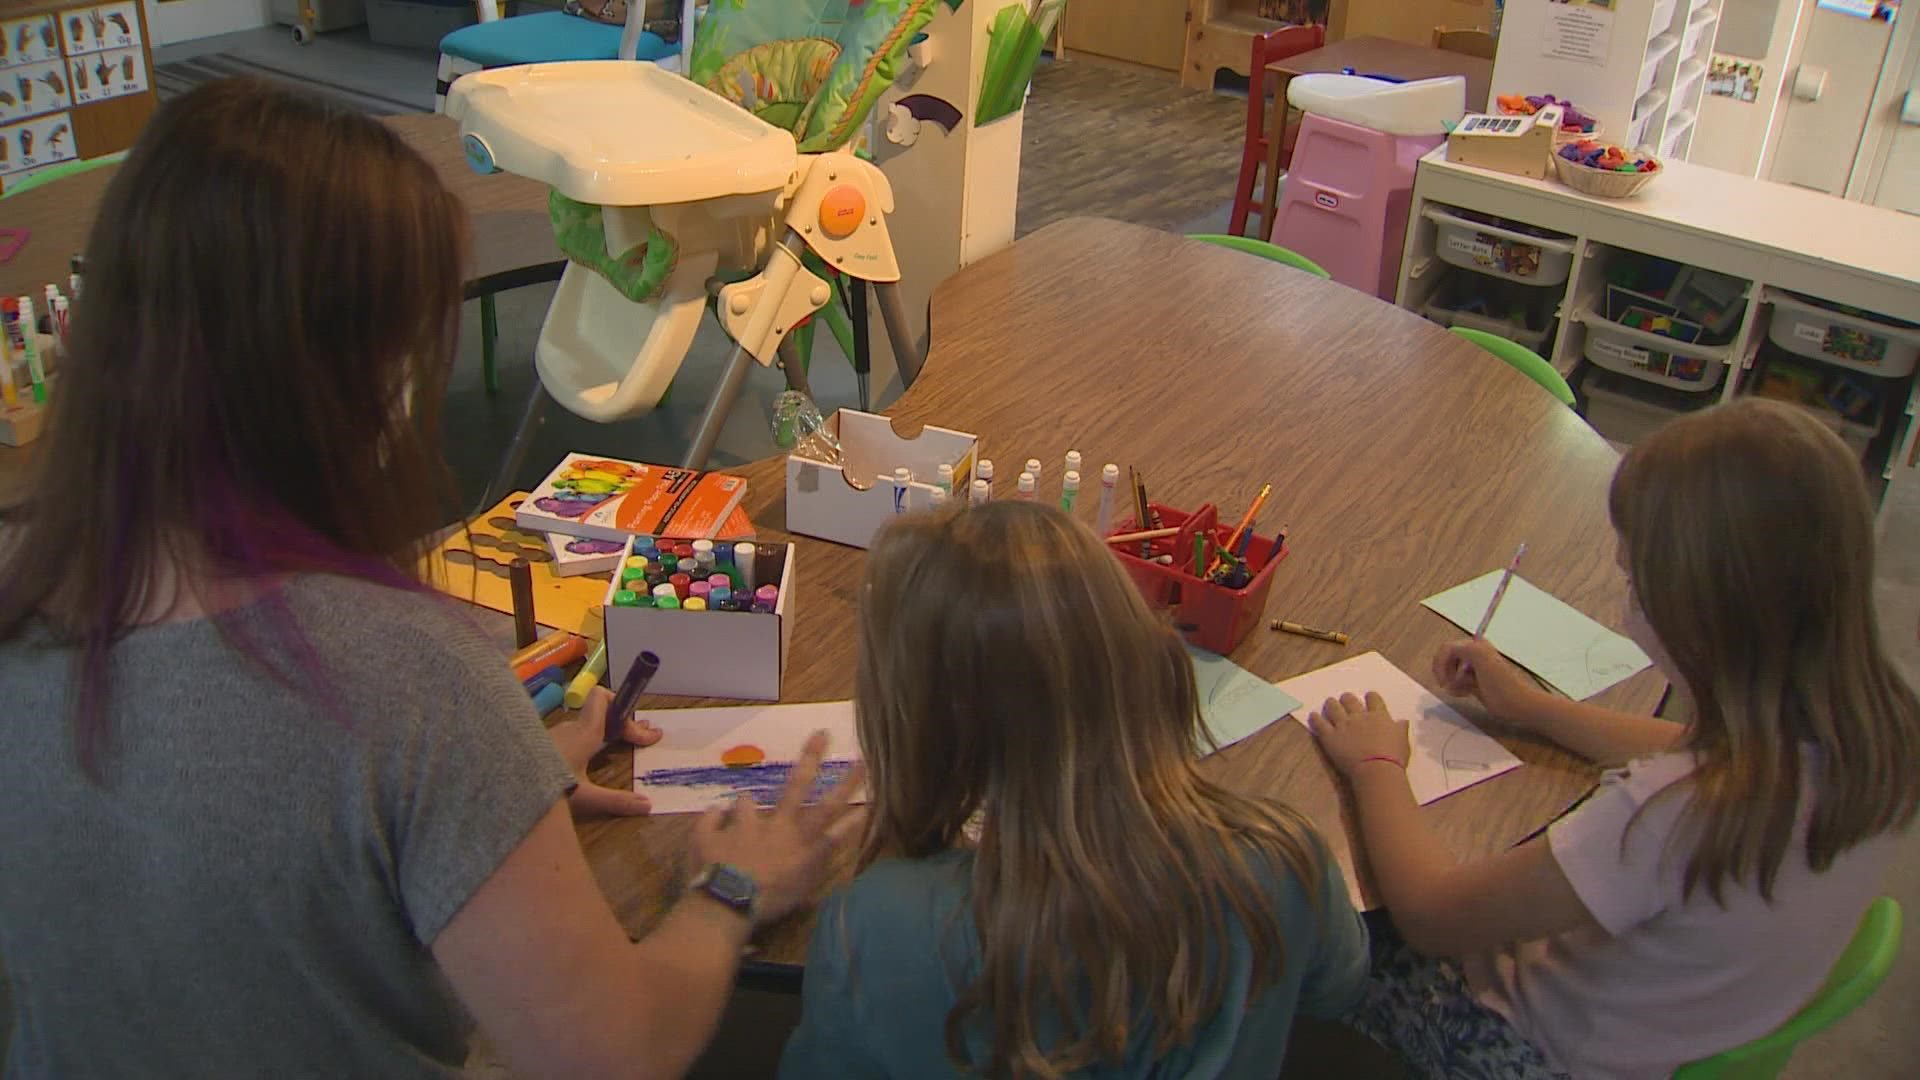 In Washington State, new data shows child care can cost more than a semester of college.